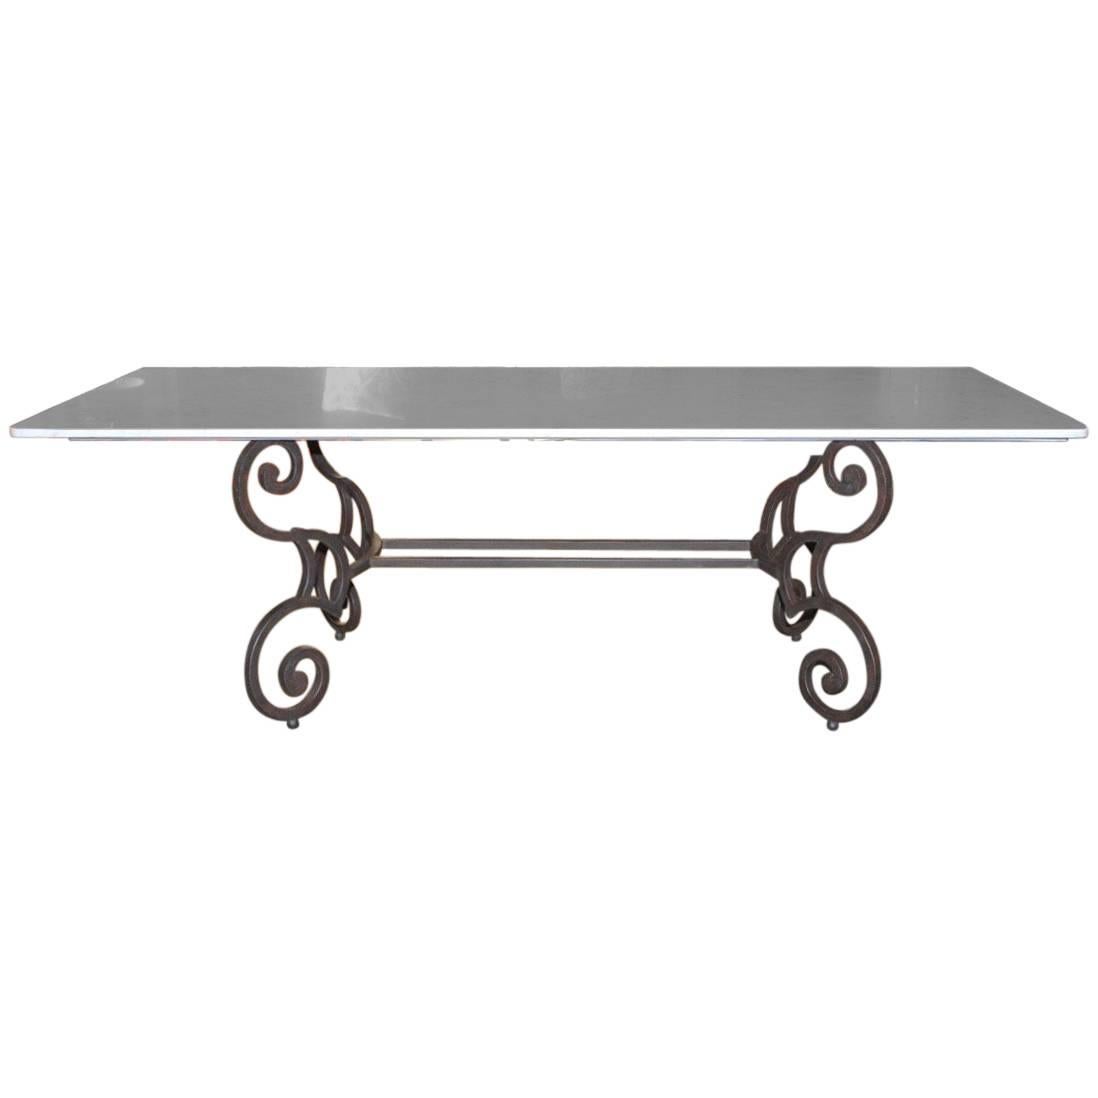 Italian Carrara Marble-Top Dining Table with Scrolled Iron Base